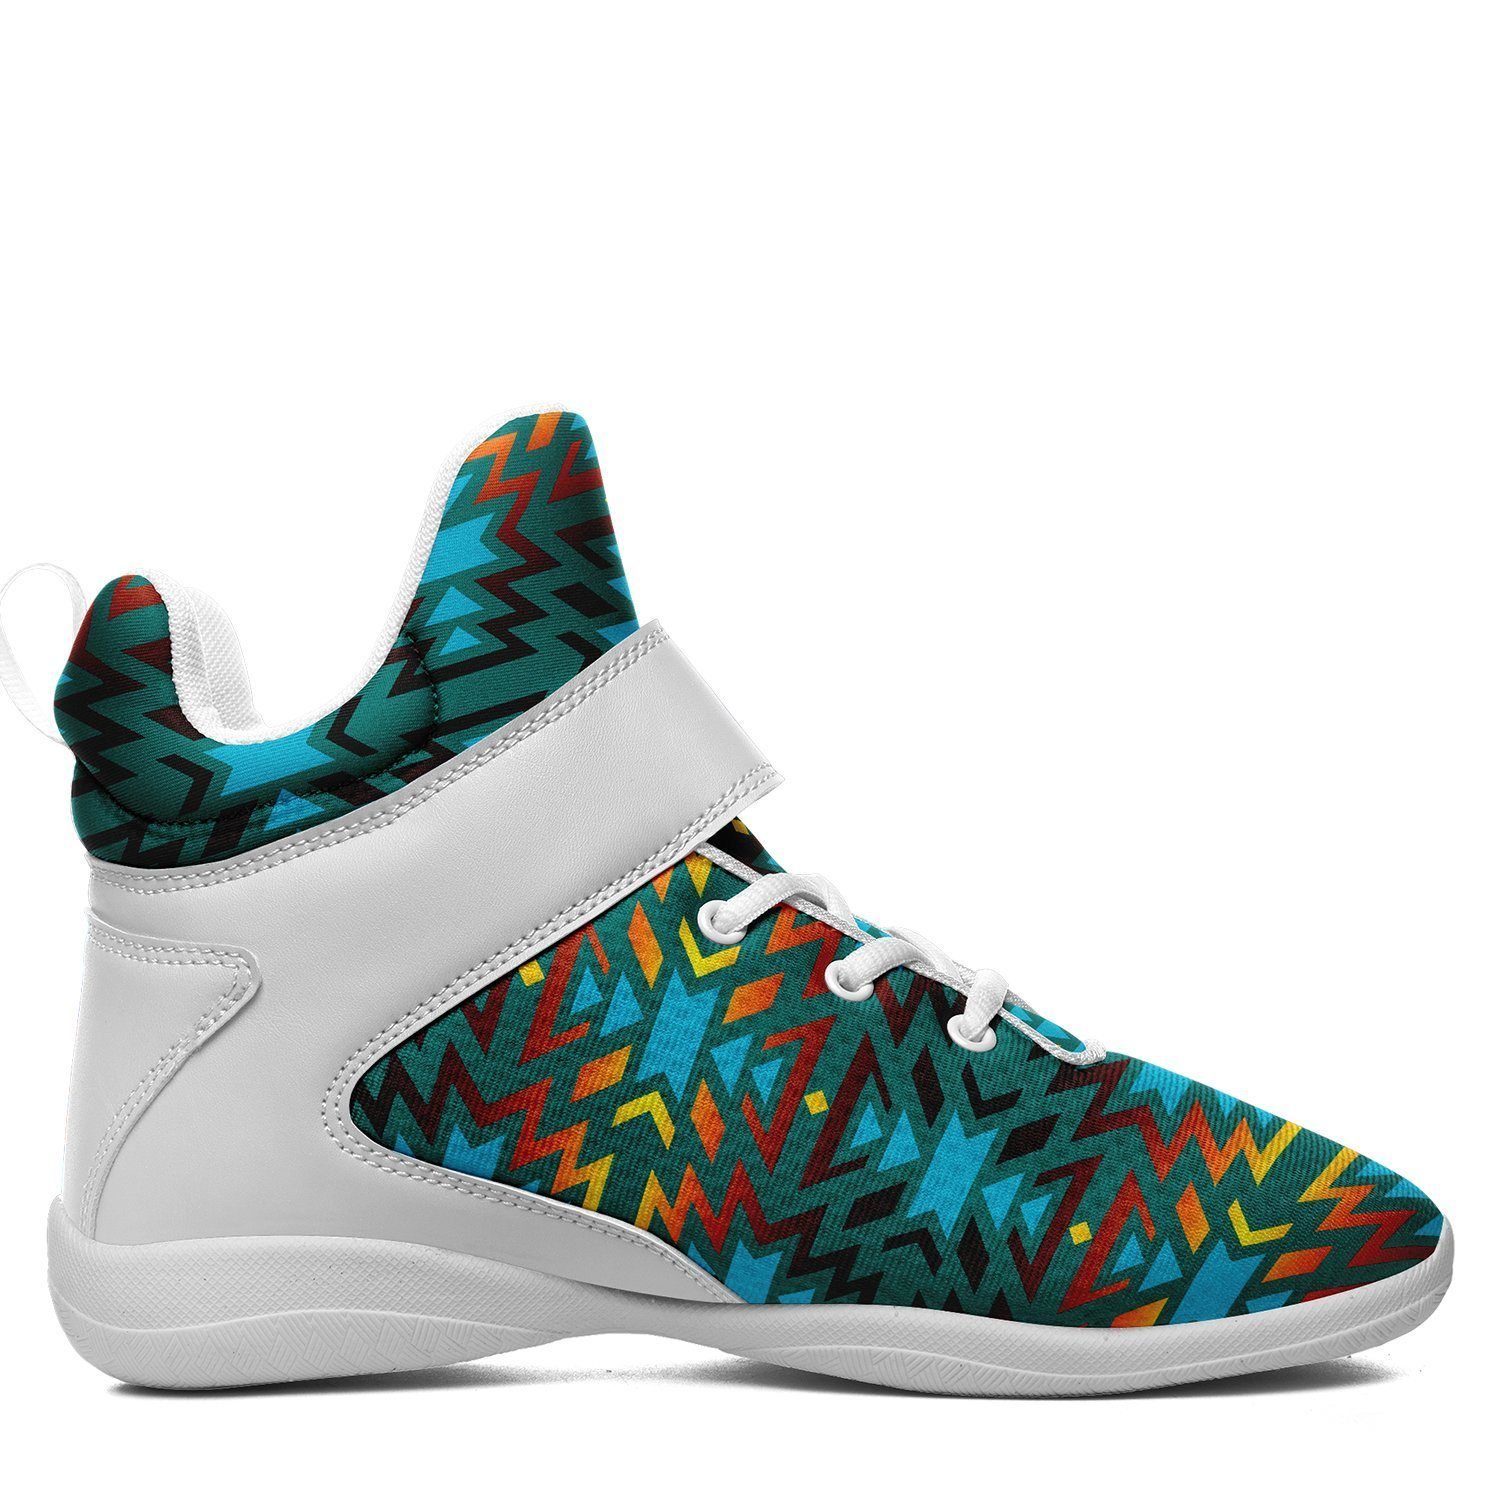 Fire Colors and Turquoise Teal Ipottaa Basketball / Sport High Top Shoes - White Sole 49 Dzine 